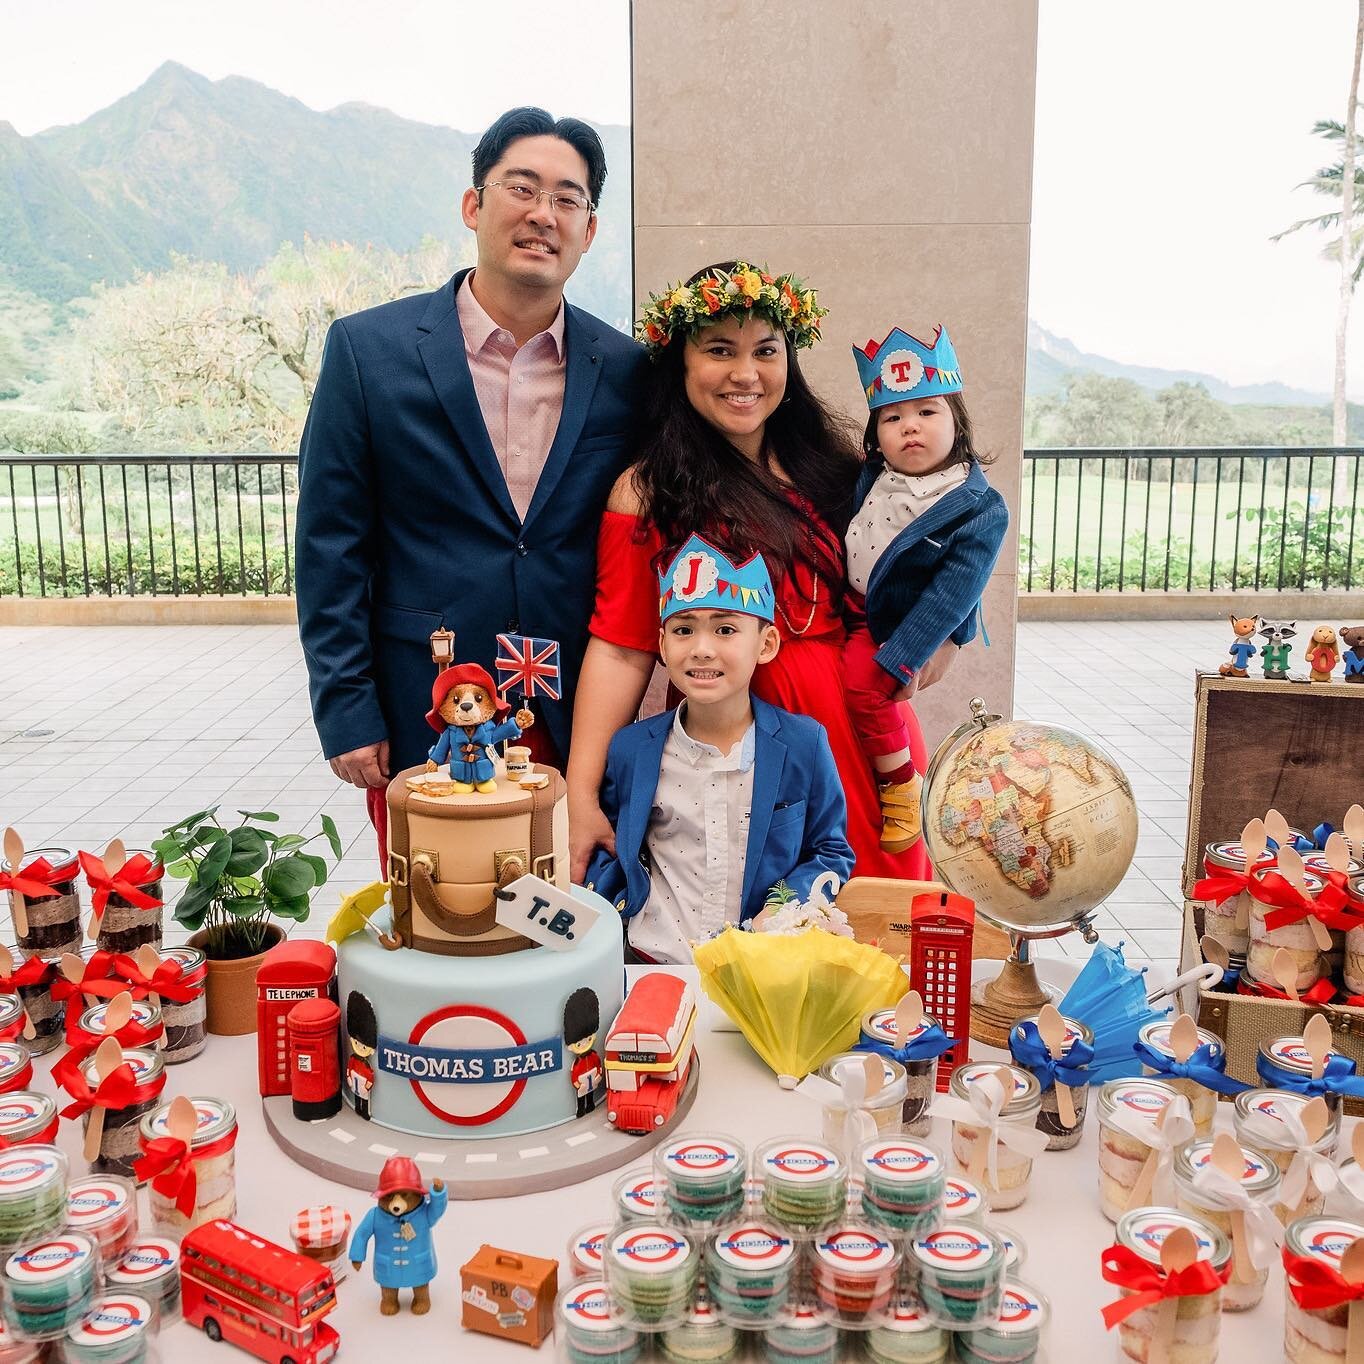 Super fun Paddington Bear themed party for Thomas&rsquo; 1st Birthday.  Thank you again to the Hanzawa family for having us capture these special moments.